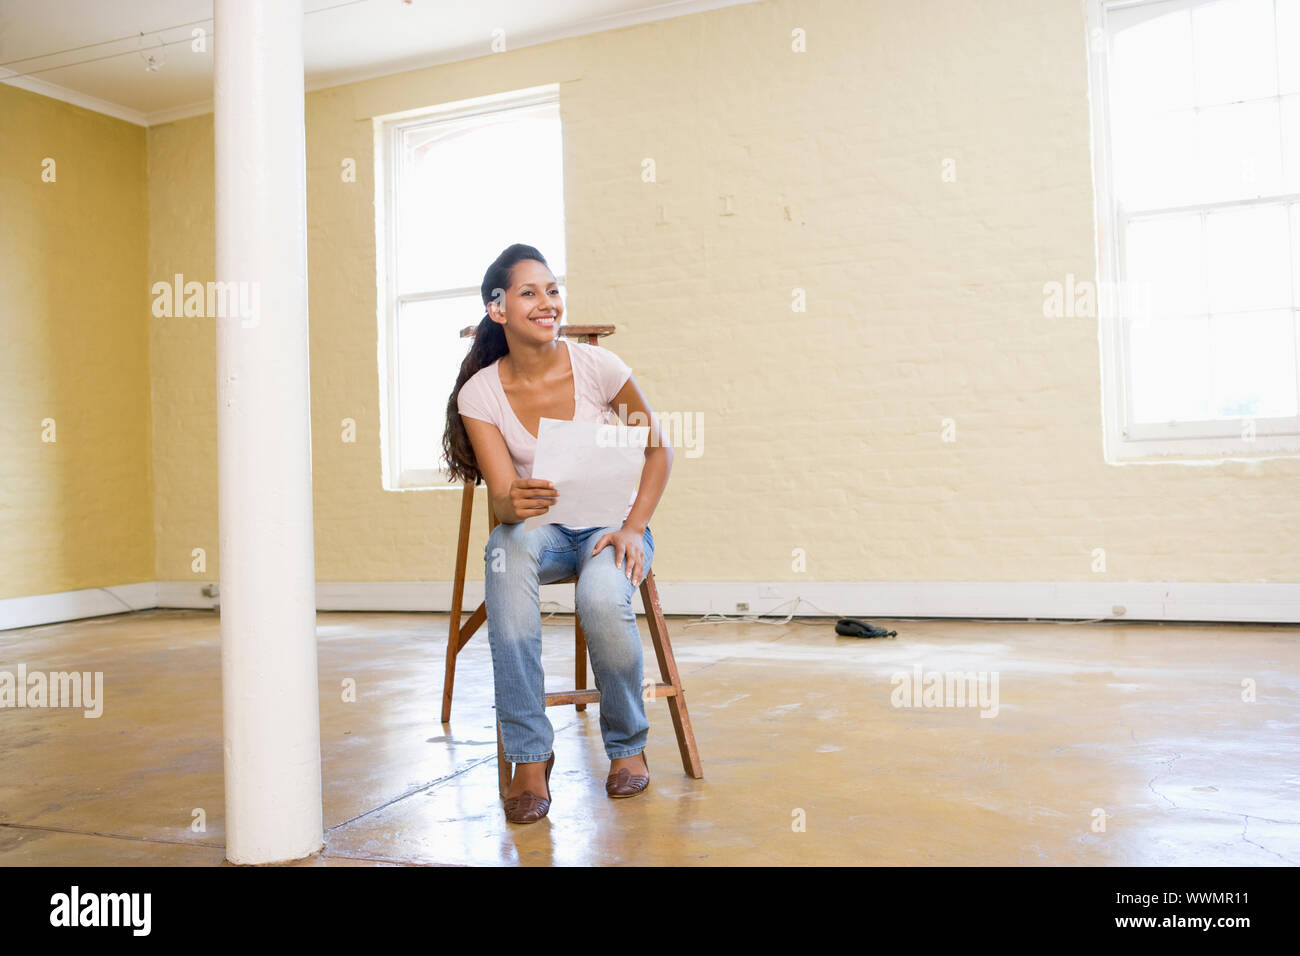 Woman sitting on ladder in empty space holding paper Stock Photo